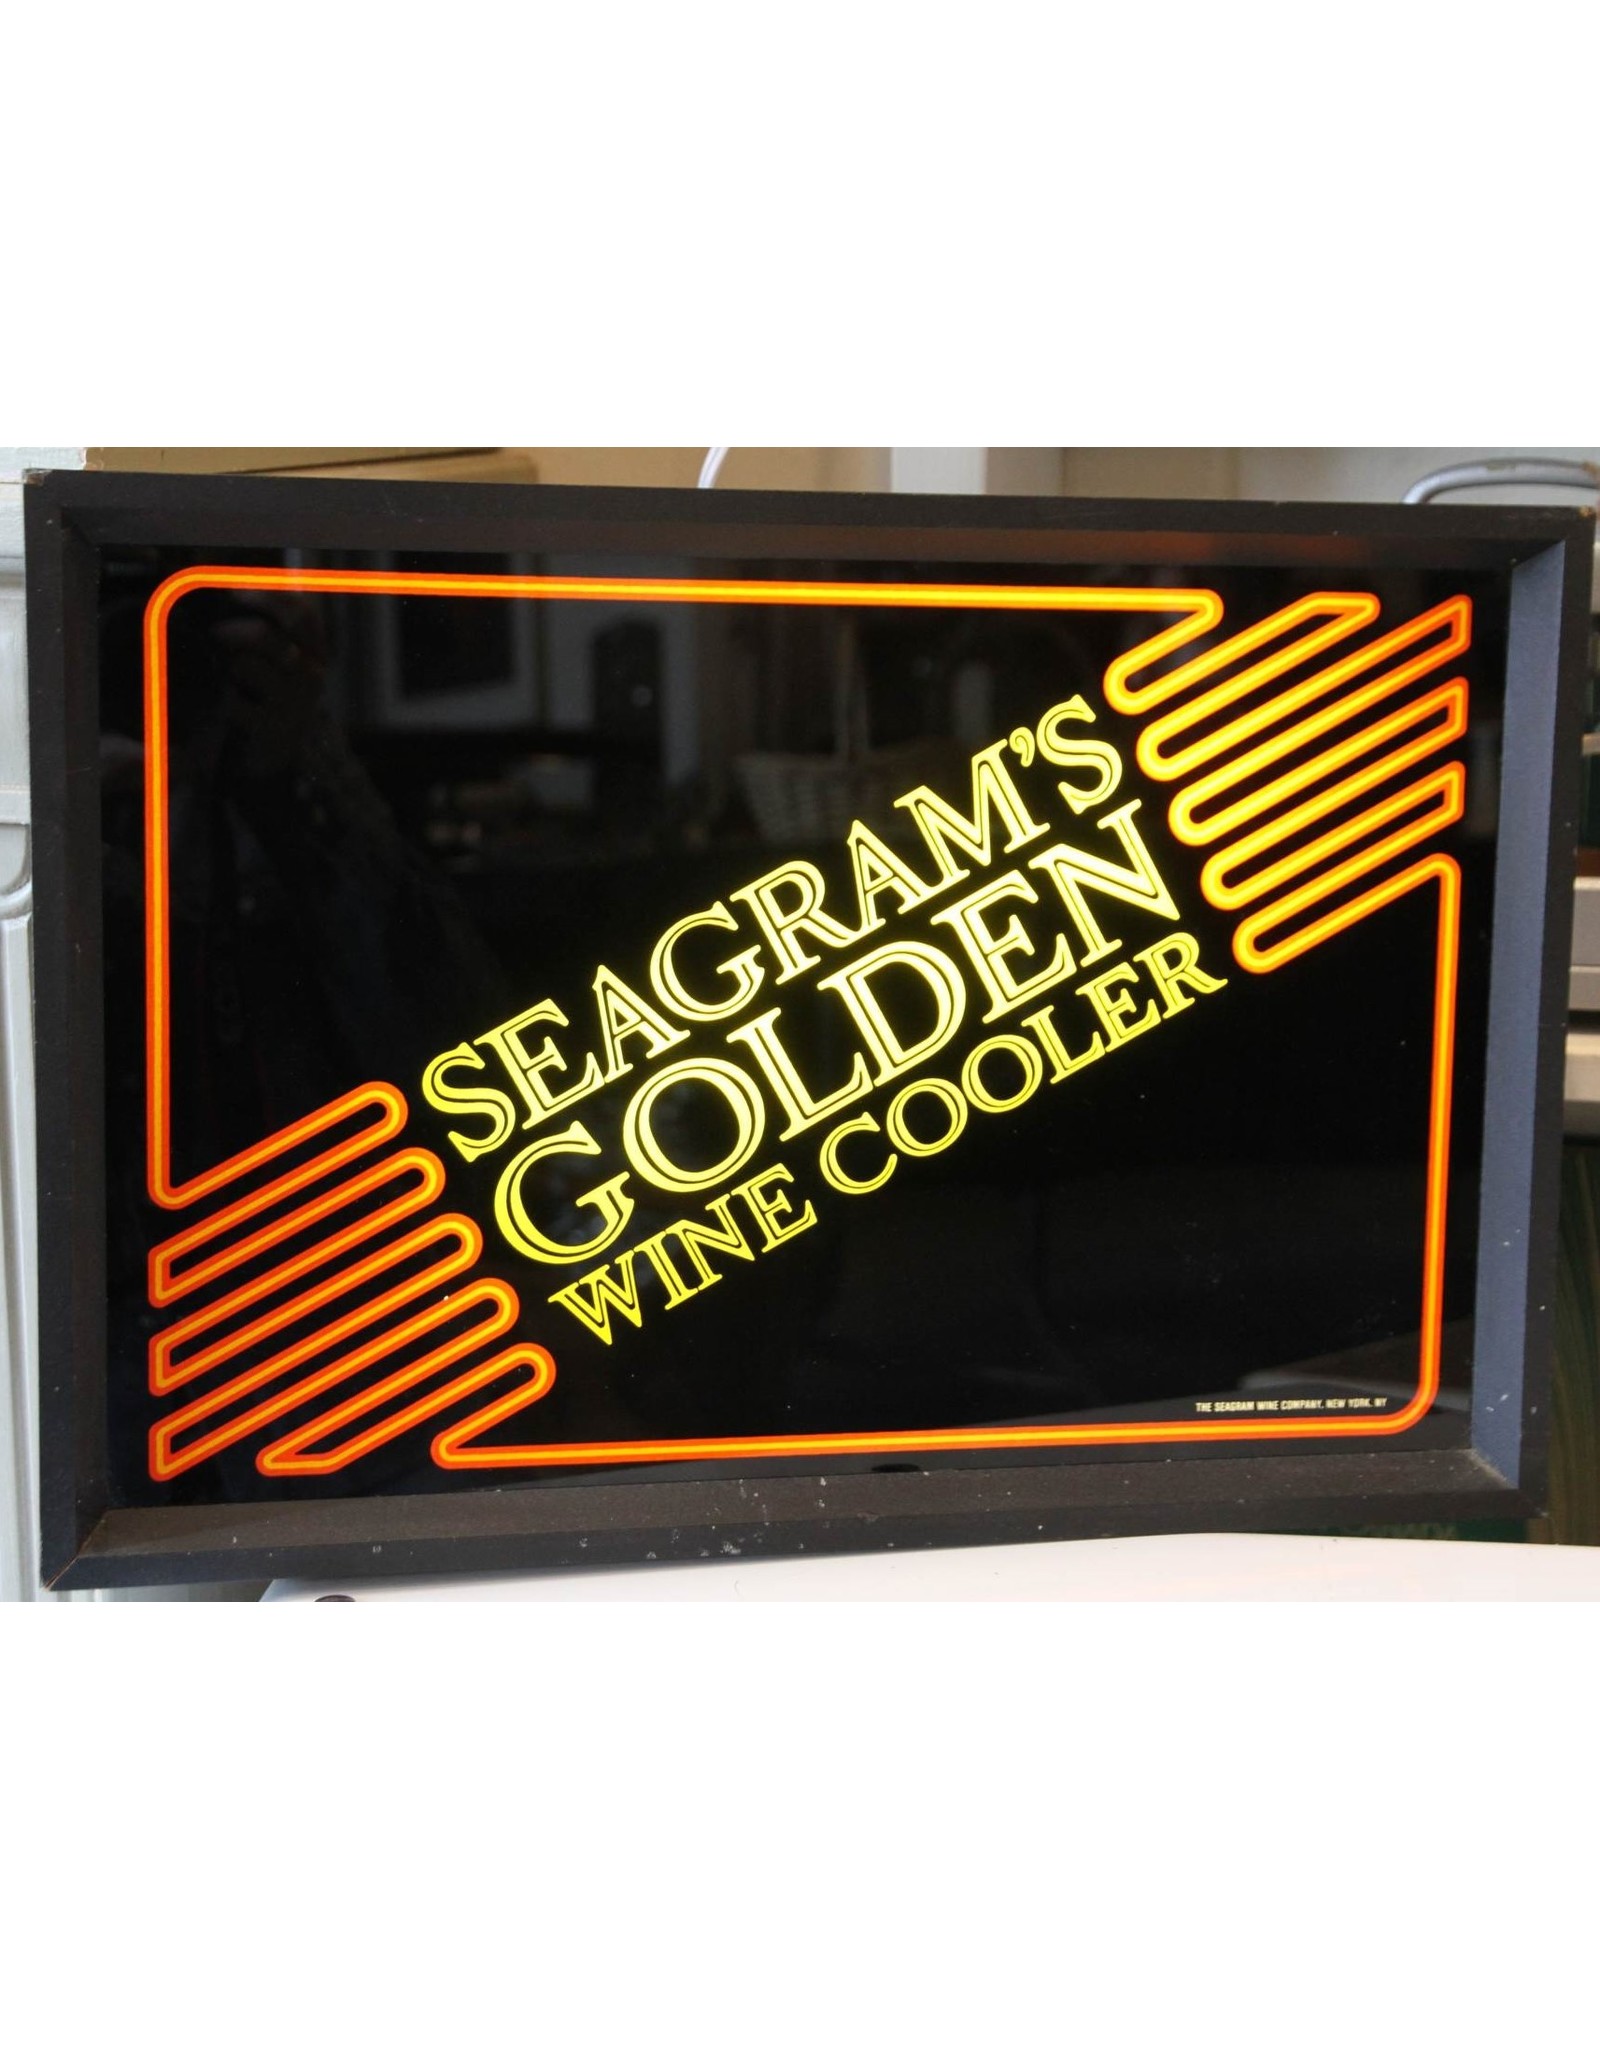 Seagram's light up advertising sign